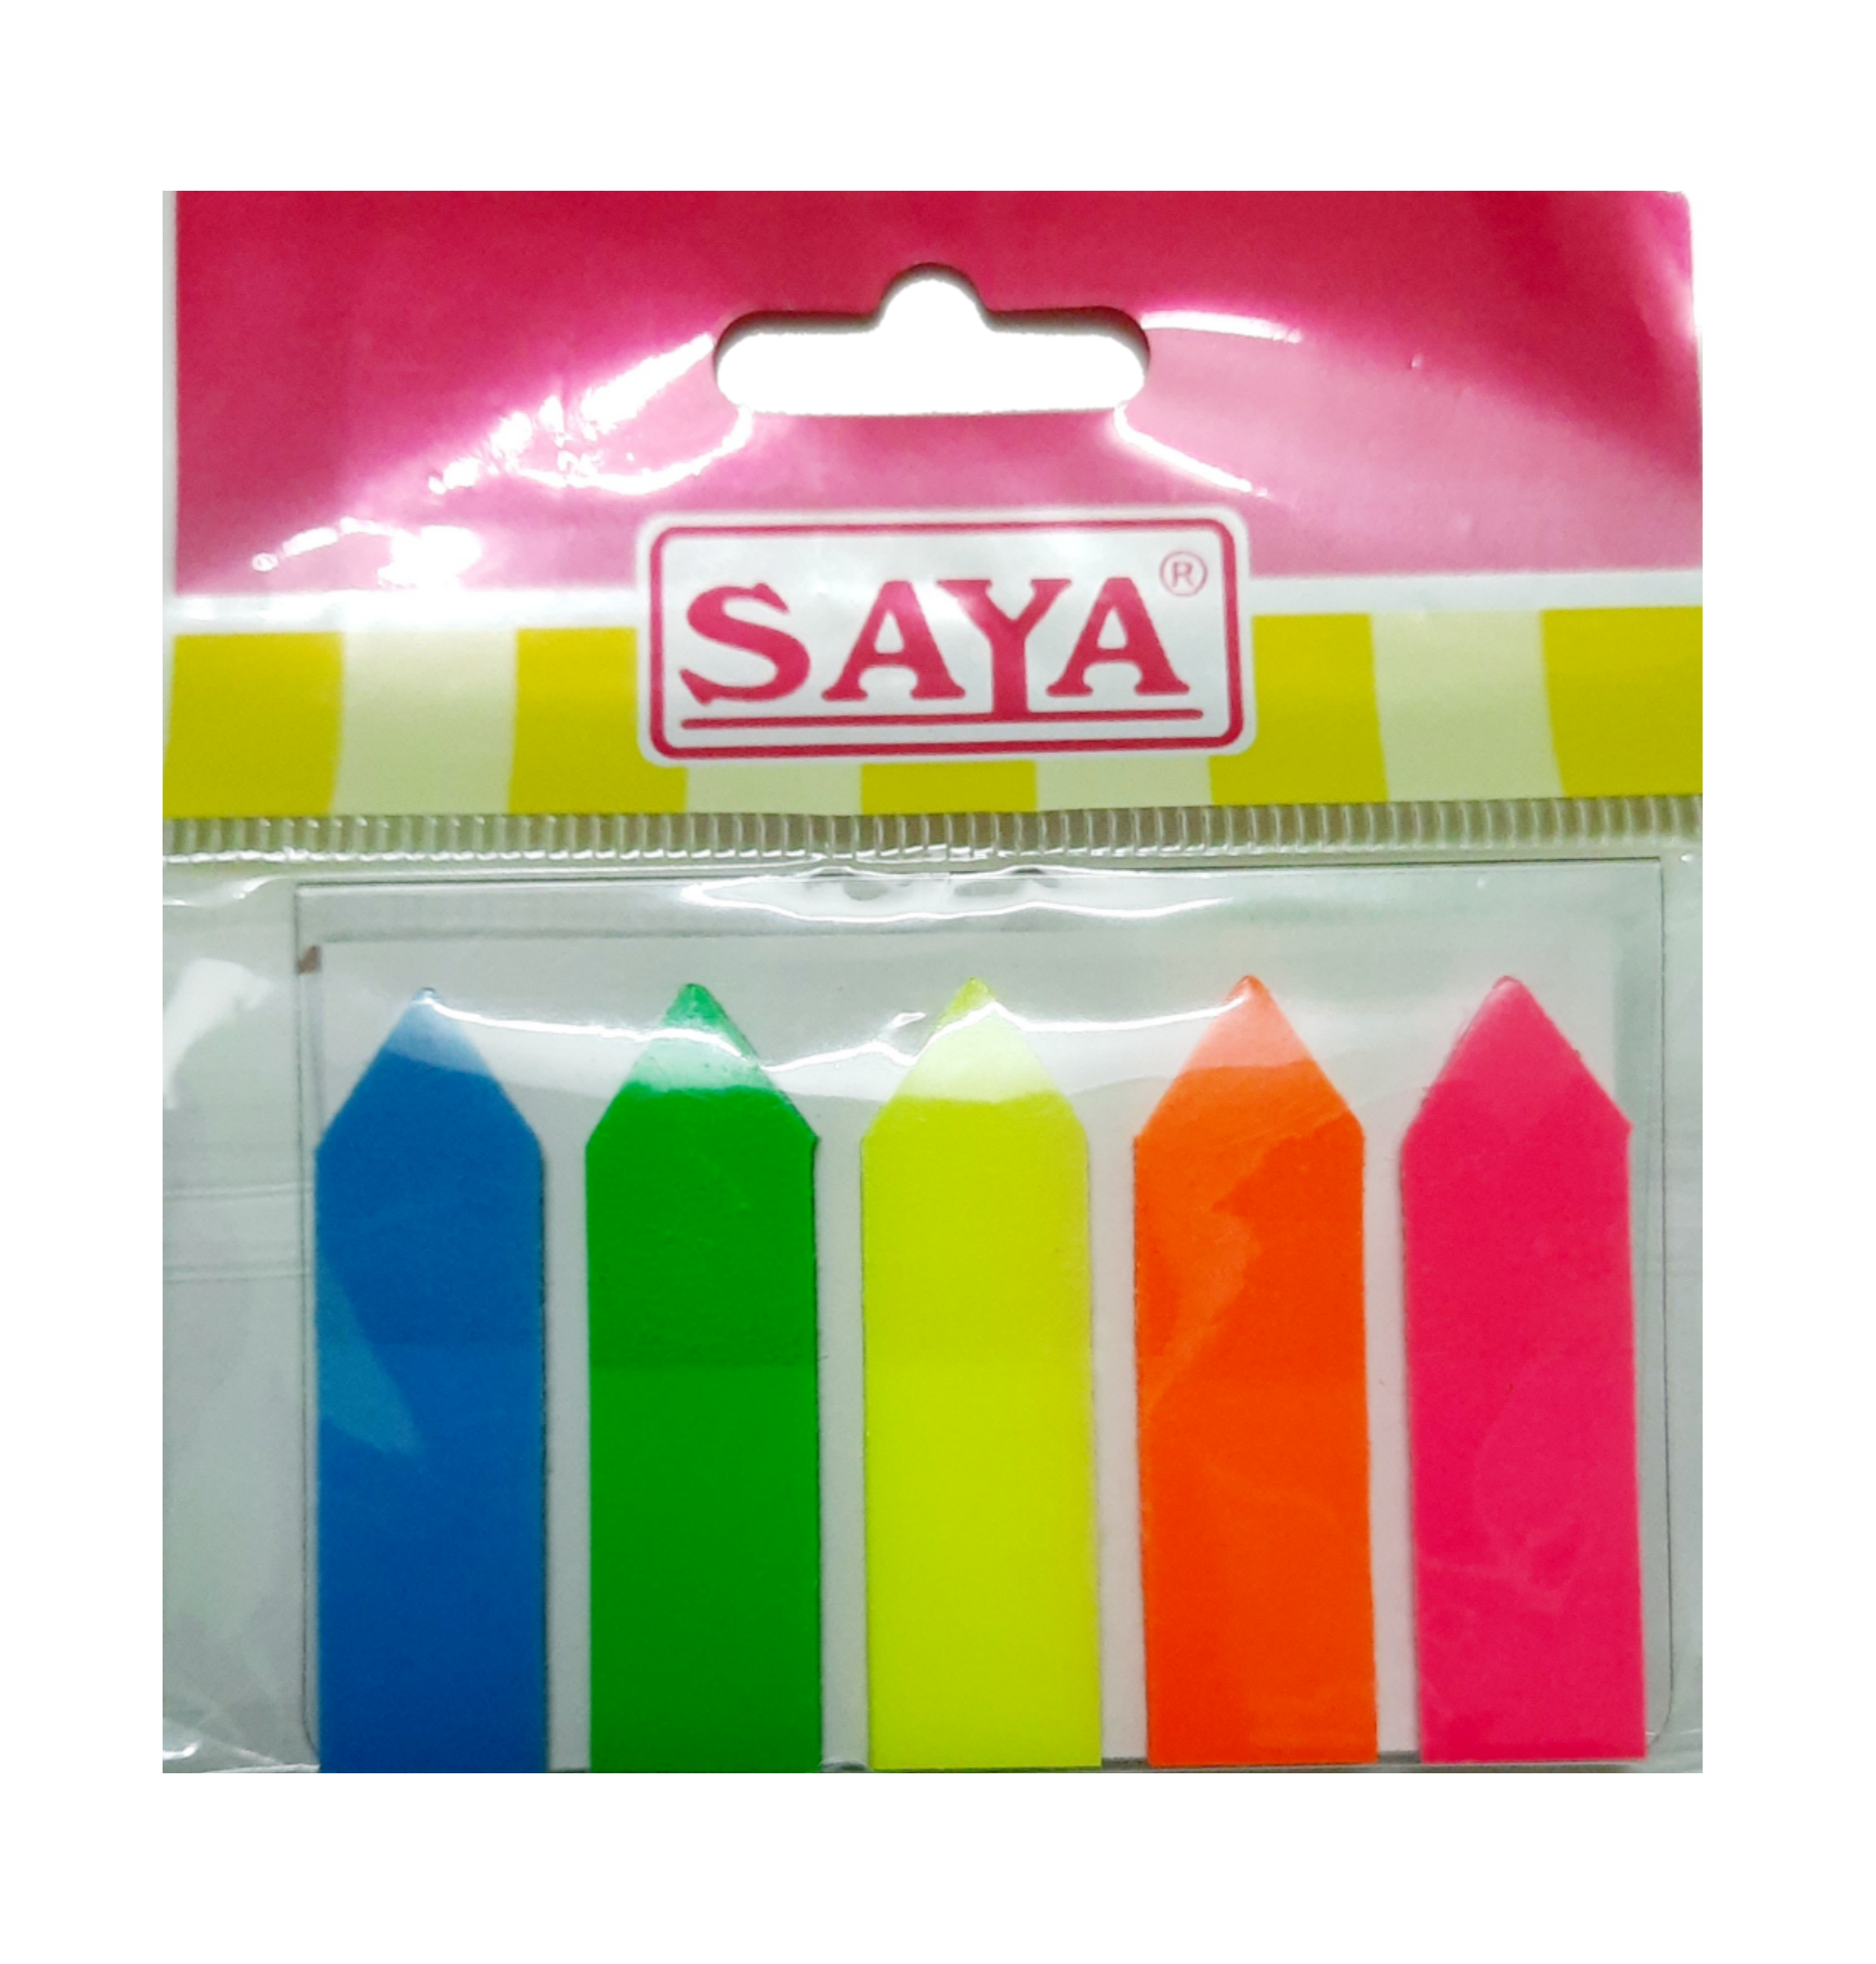 Saya Arrow Pet Index Tabs, Page Marker, SY-SN09, 12X45 mm, Pack of 1